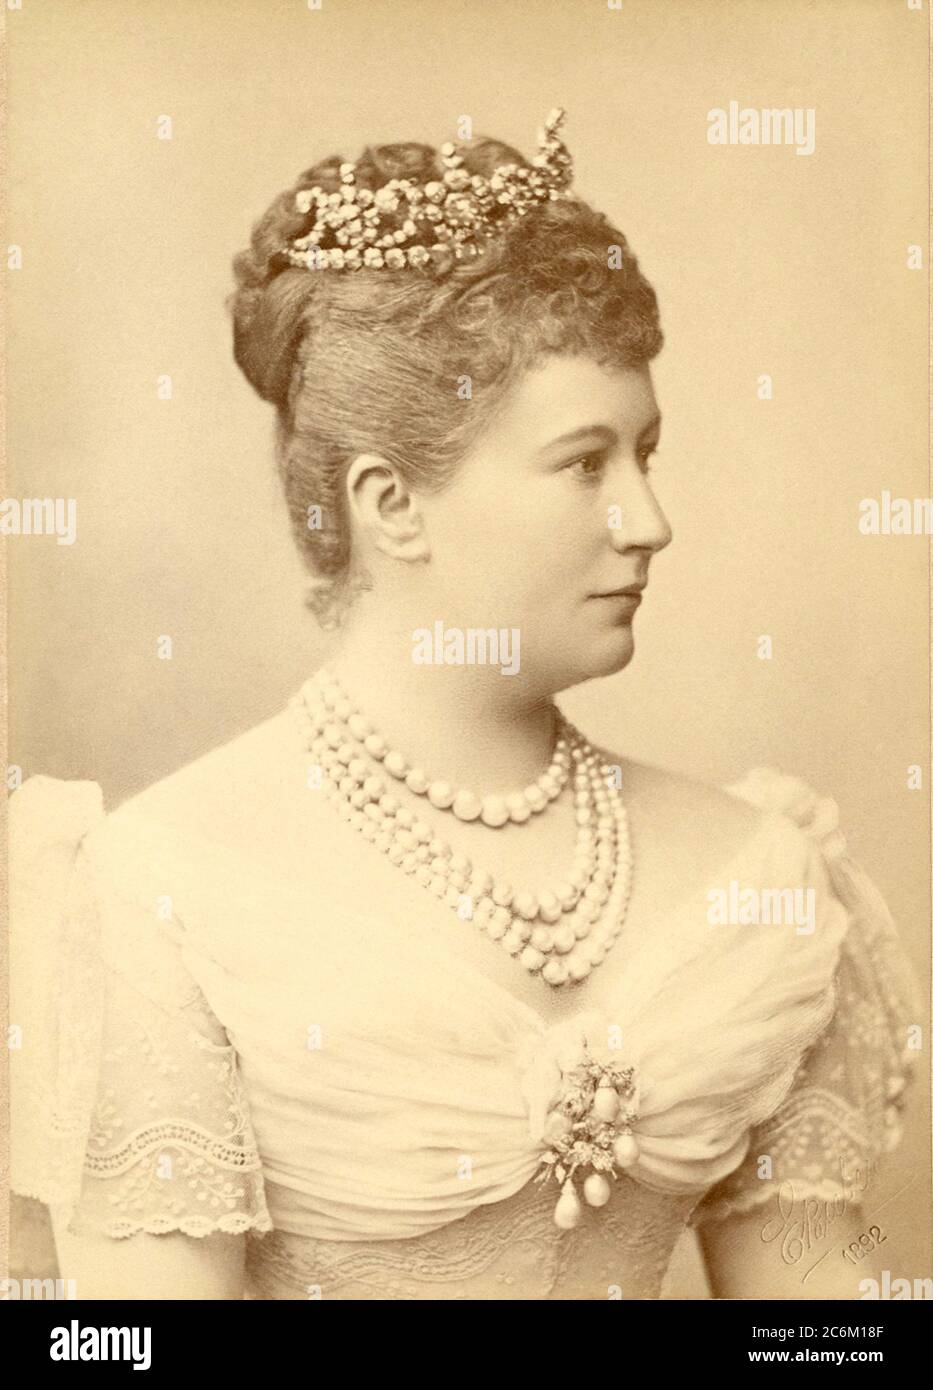 1882 , BERLIN , GERMANY : The german Empress AUGUSTA VICTORIA ( 1840 - 1901 ), daughter of Queen VICTORIA of England  ( 1819 - 1901 ) and prince Albert Saxe-Coburg-Gotha . Married in 1858 to german kronprinz FREDERIK of Prussia ( future FREDERIK III in 1888 ) . Mother of future Kaiser of Germany Wilhelm II ( 1859 - 1941 ) HOHENZOLLERN . Photo by woman photographer EMILIE BIEBER ( 1810- 1884 ). - House of  WINDSOR  - ENGLAND - GREAT BRITAIN  - FOTOGRAFA - royalty - nobili - nobiltà tedesca  - portrait - ritratto  - regina - imperatrice - kaizerin - VITTORIA  - Sassonia Coburgo Gotha  - corona - Stock Photo